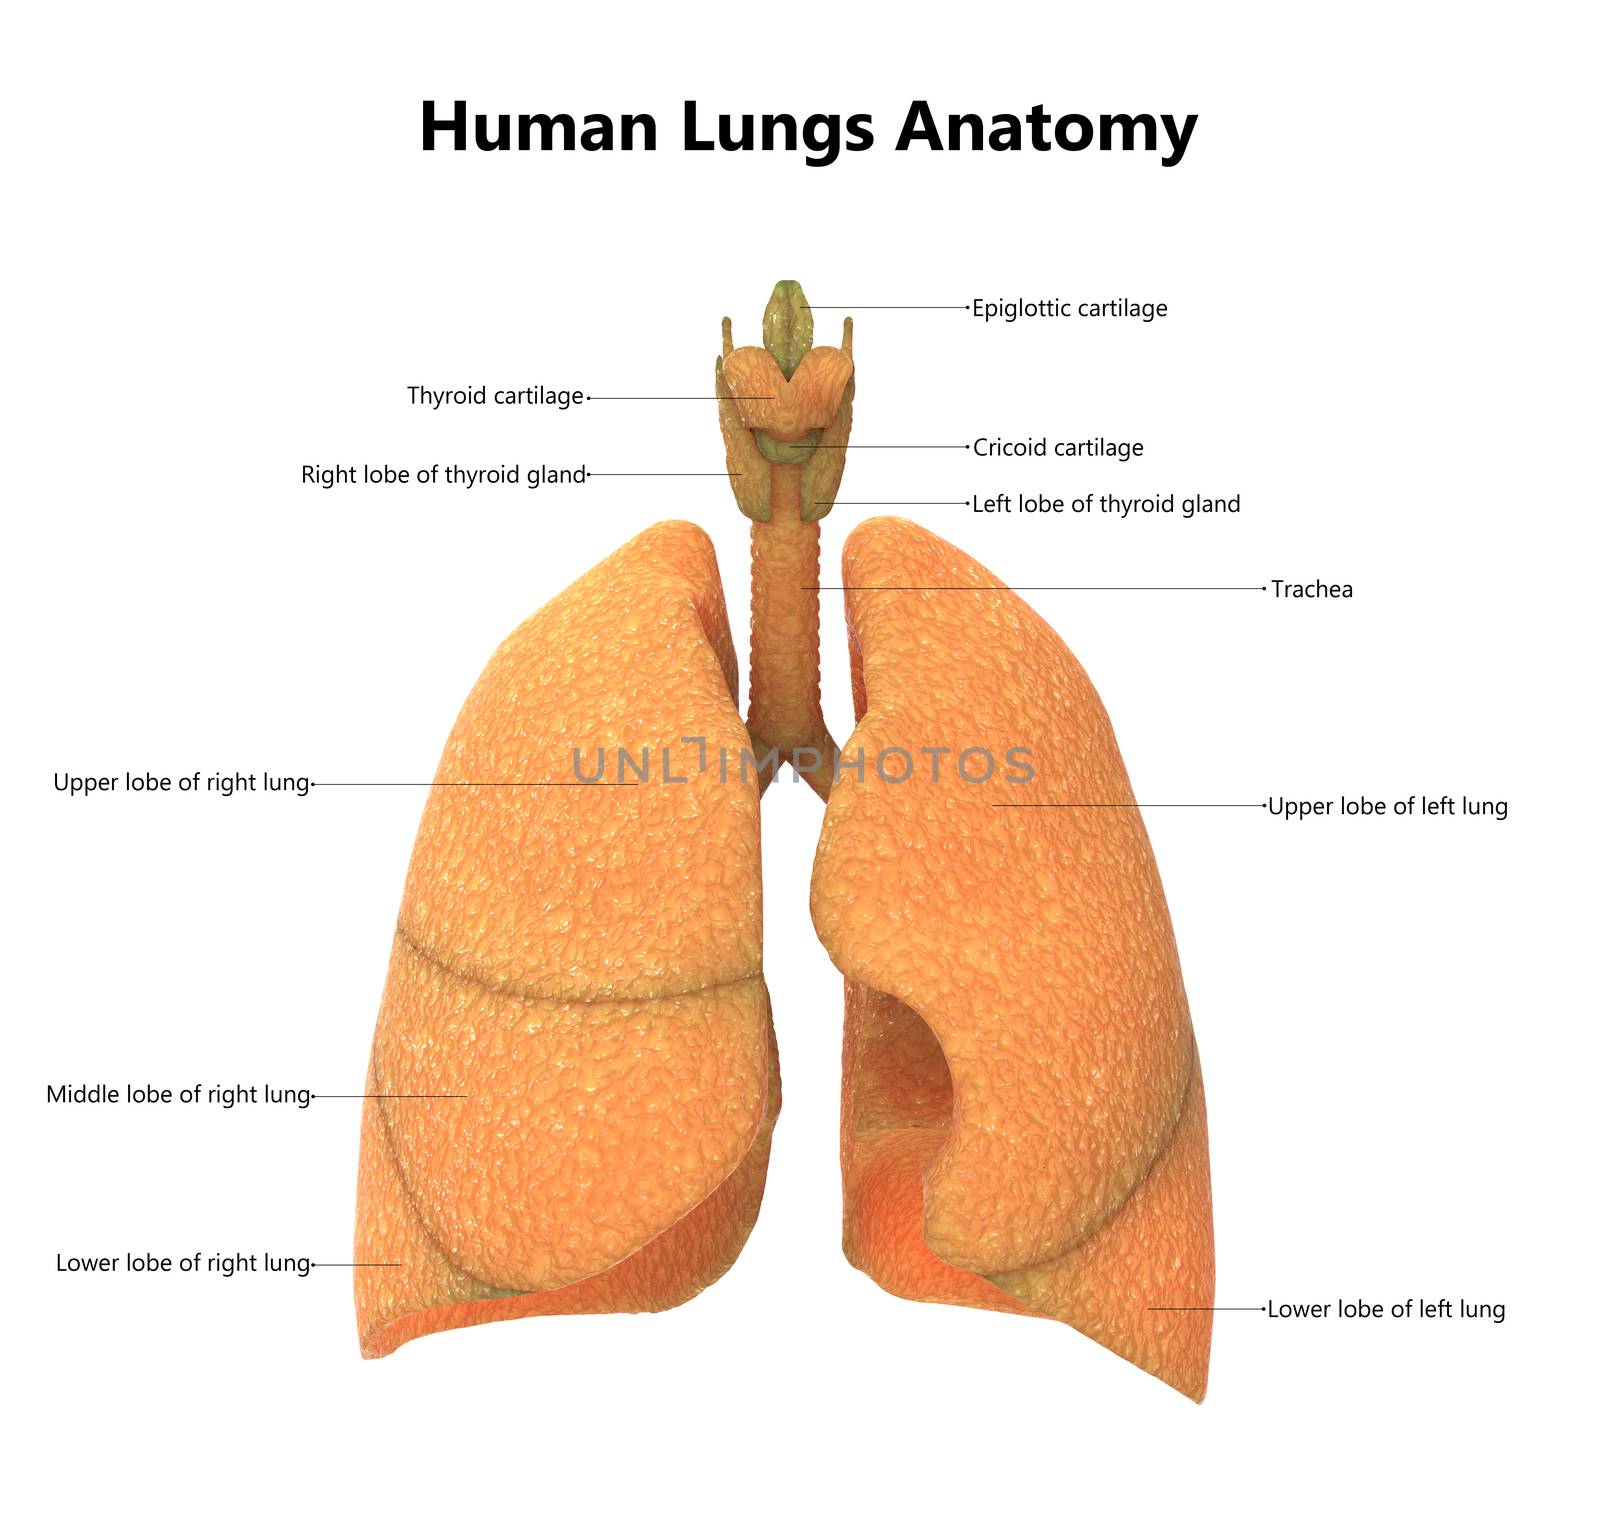 3D Illustration of Human Respiratory System Lungs Anatomy Described with Labels